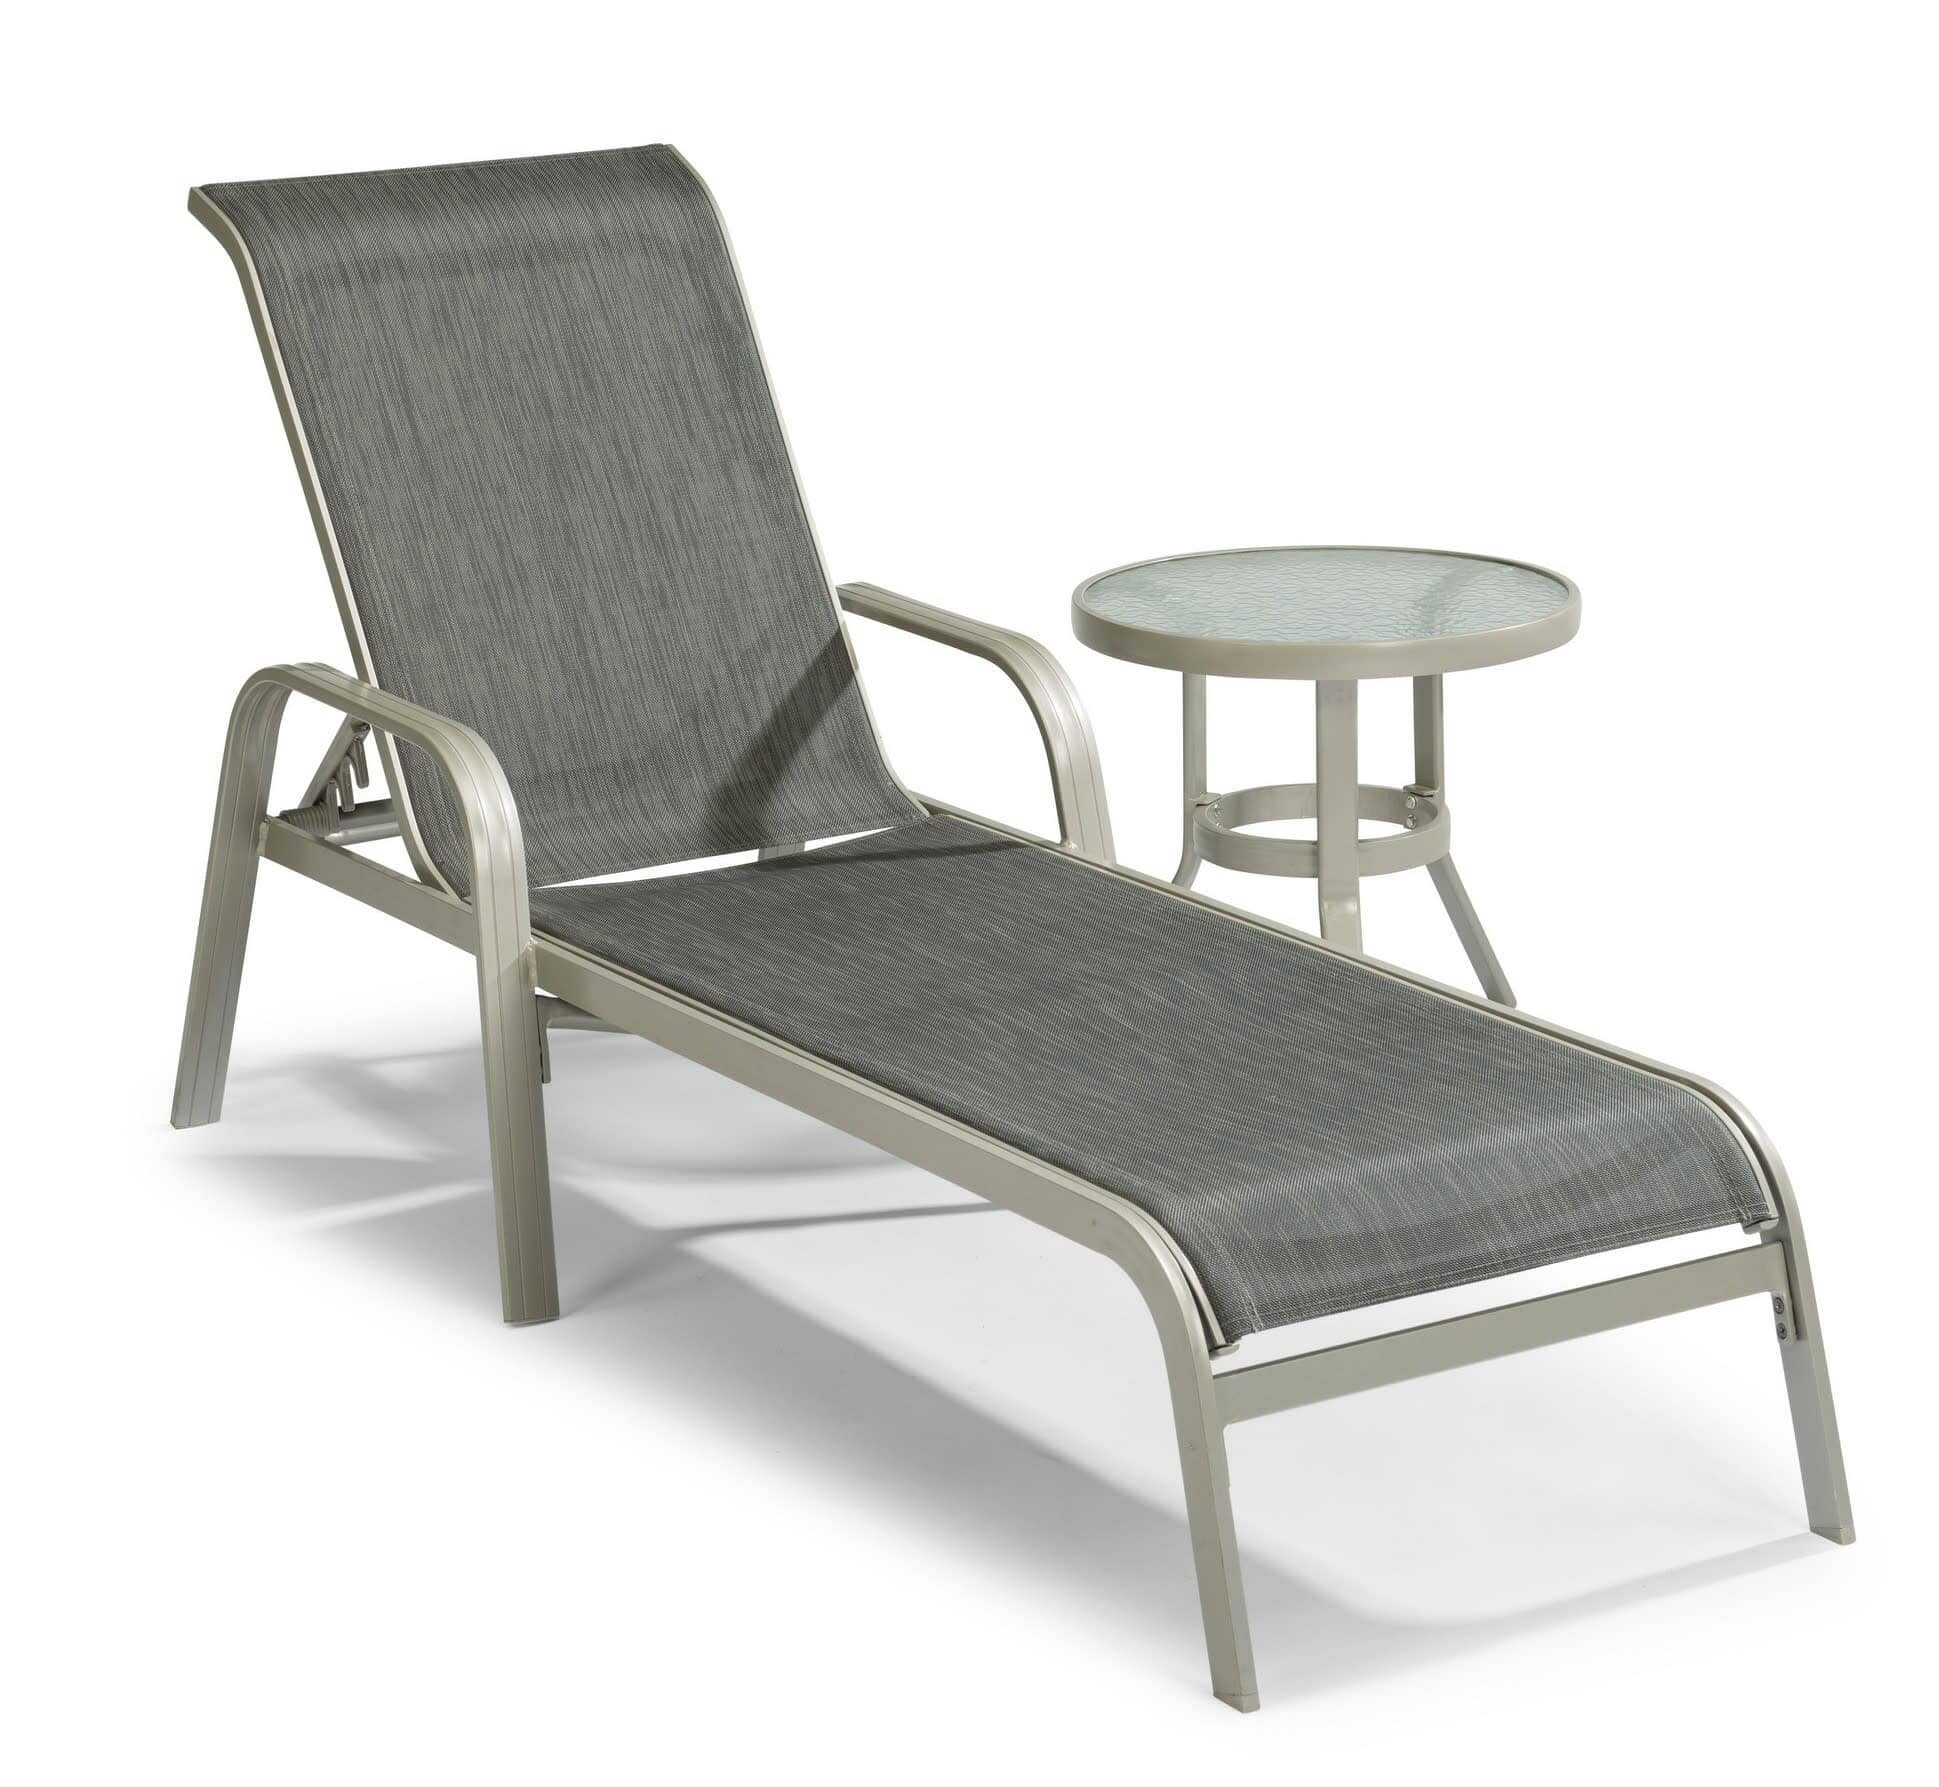 Modern & Contemporary Outdoor Chaise Lounge Set By Captiva Outdoor Seating Captiva